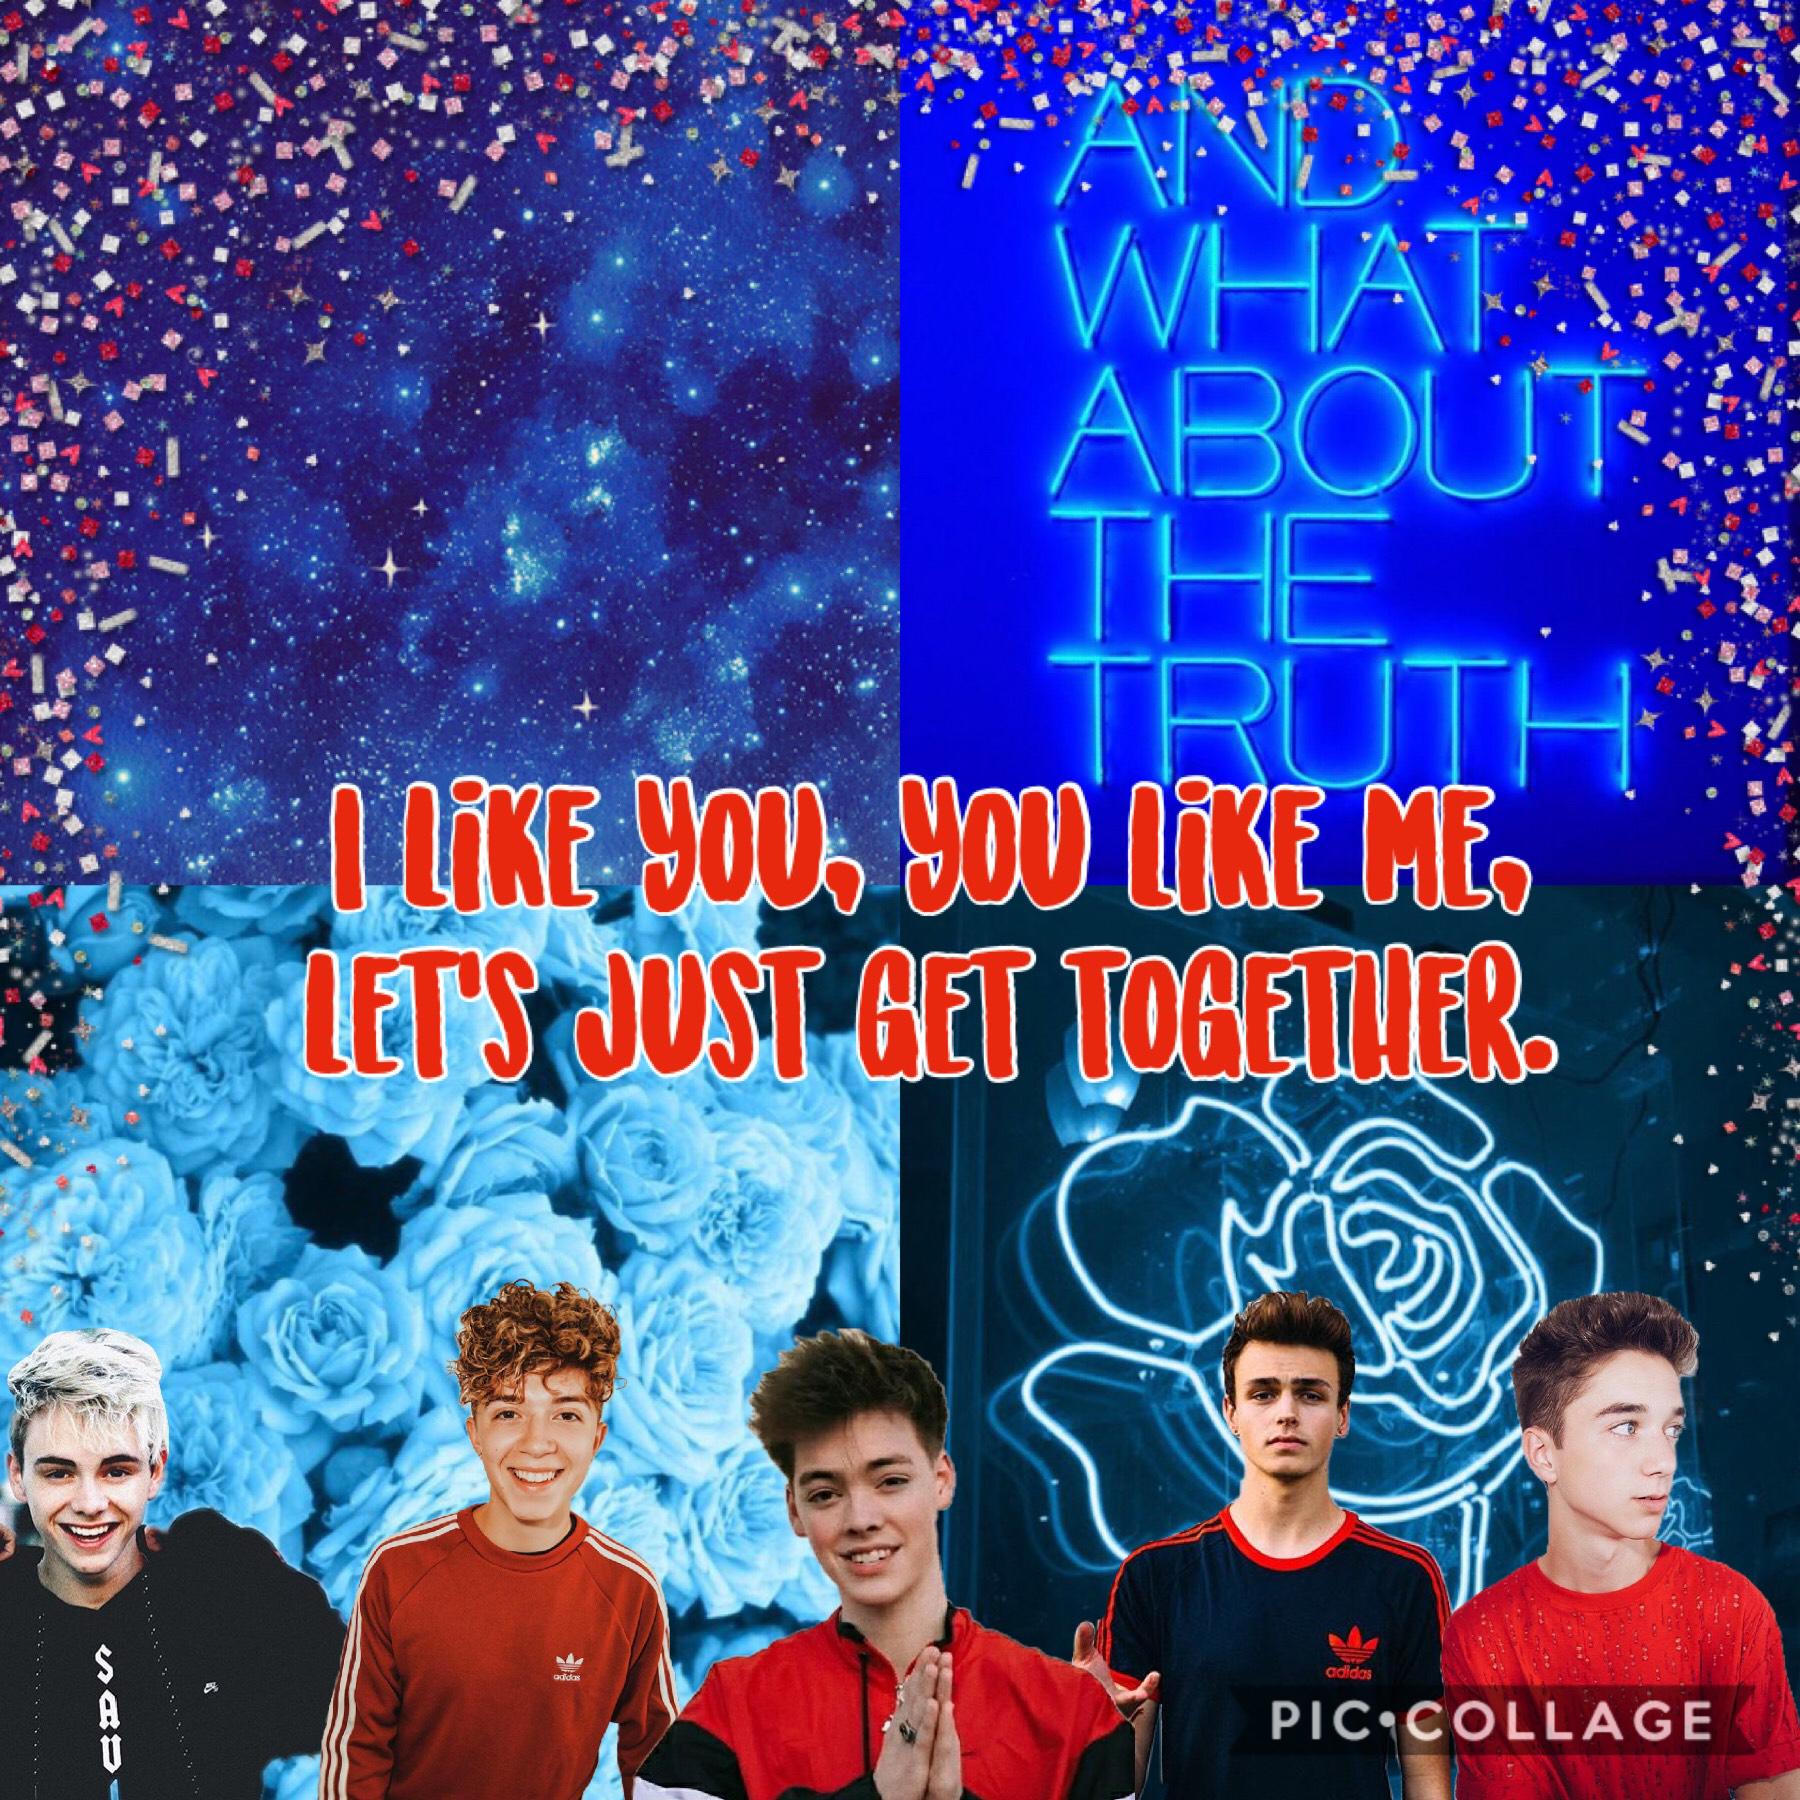 Invitation by Why don’t we.